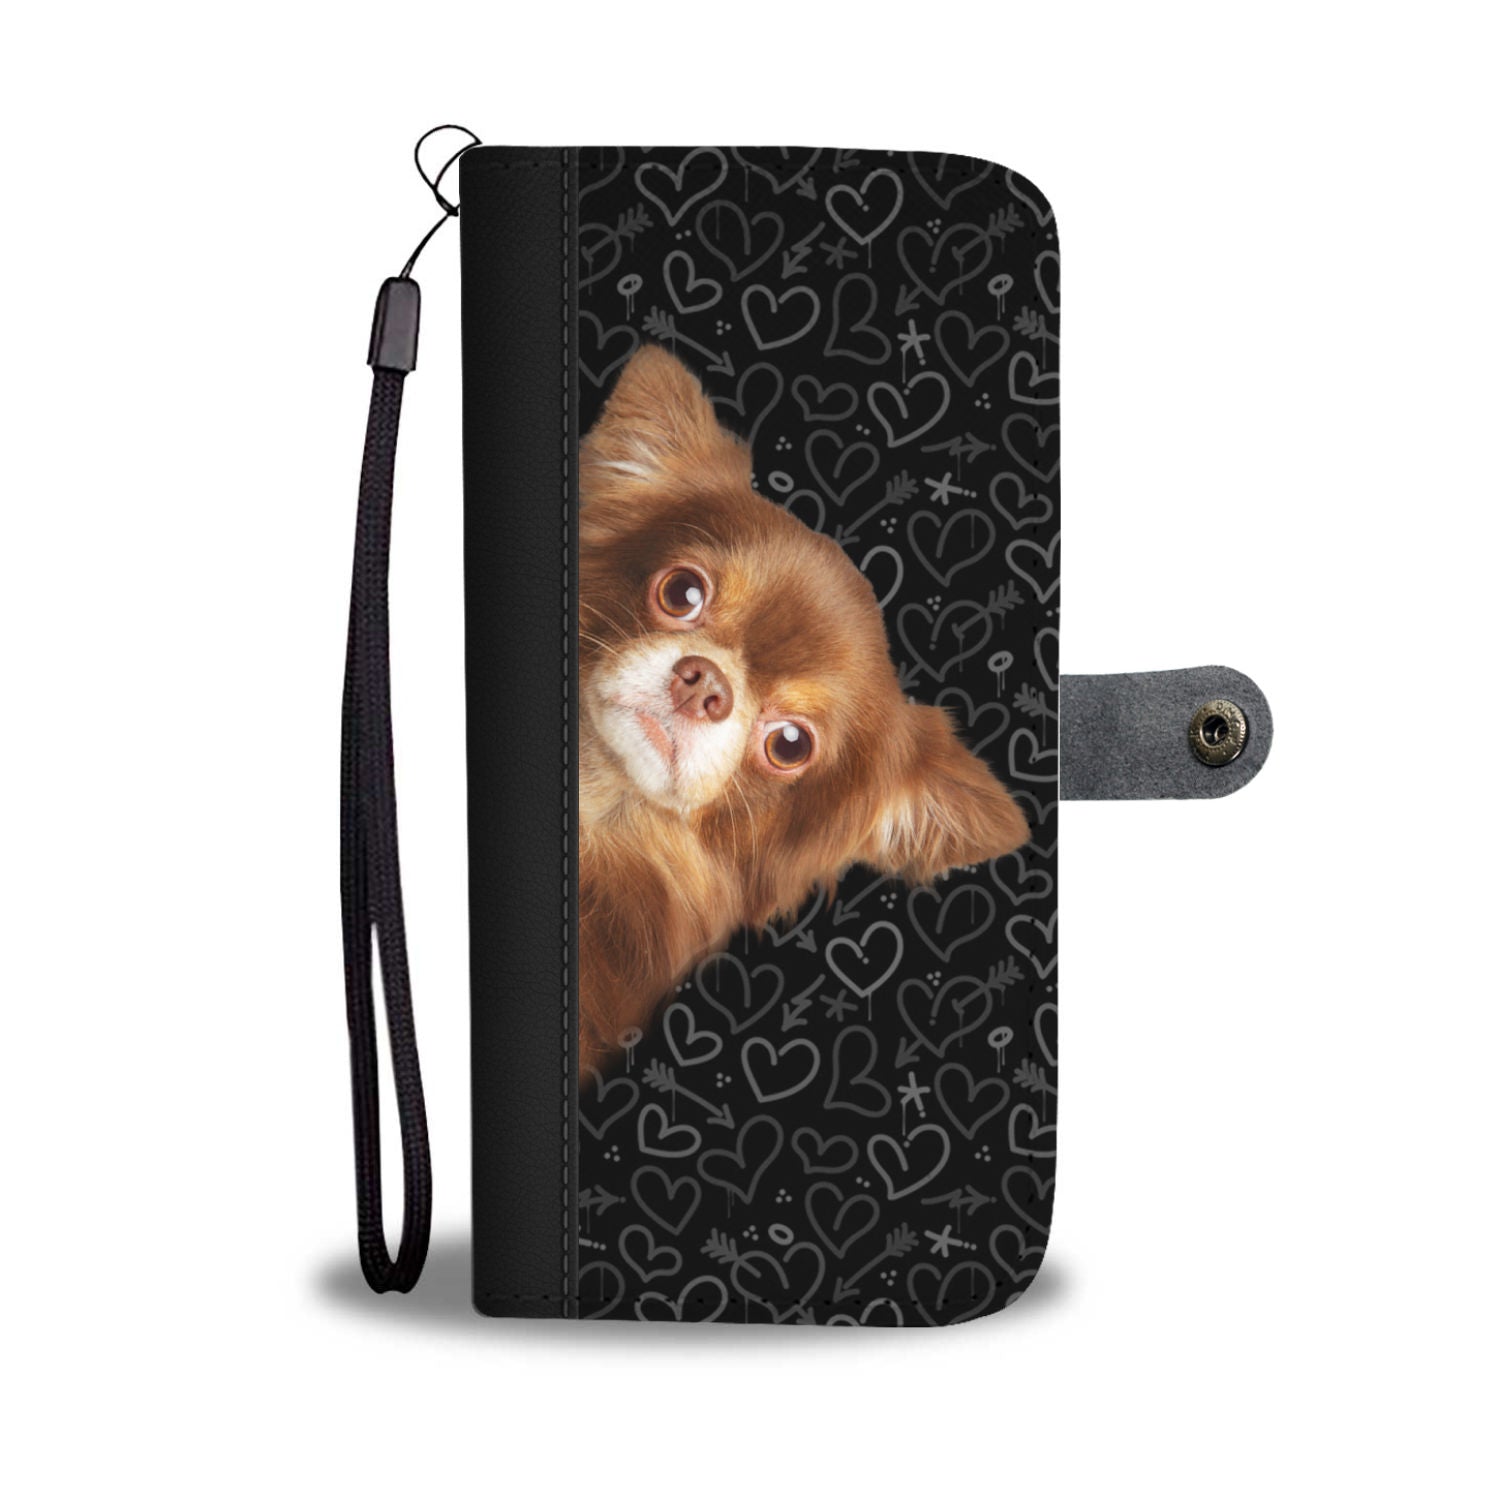 I'm Watching You, Sweetie - Chihuahua Wallet Case